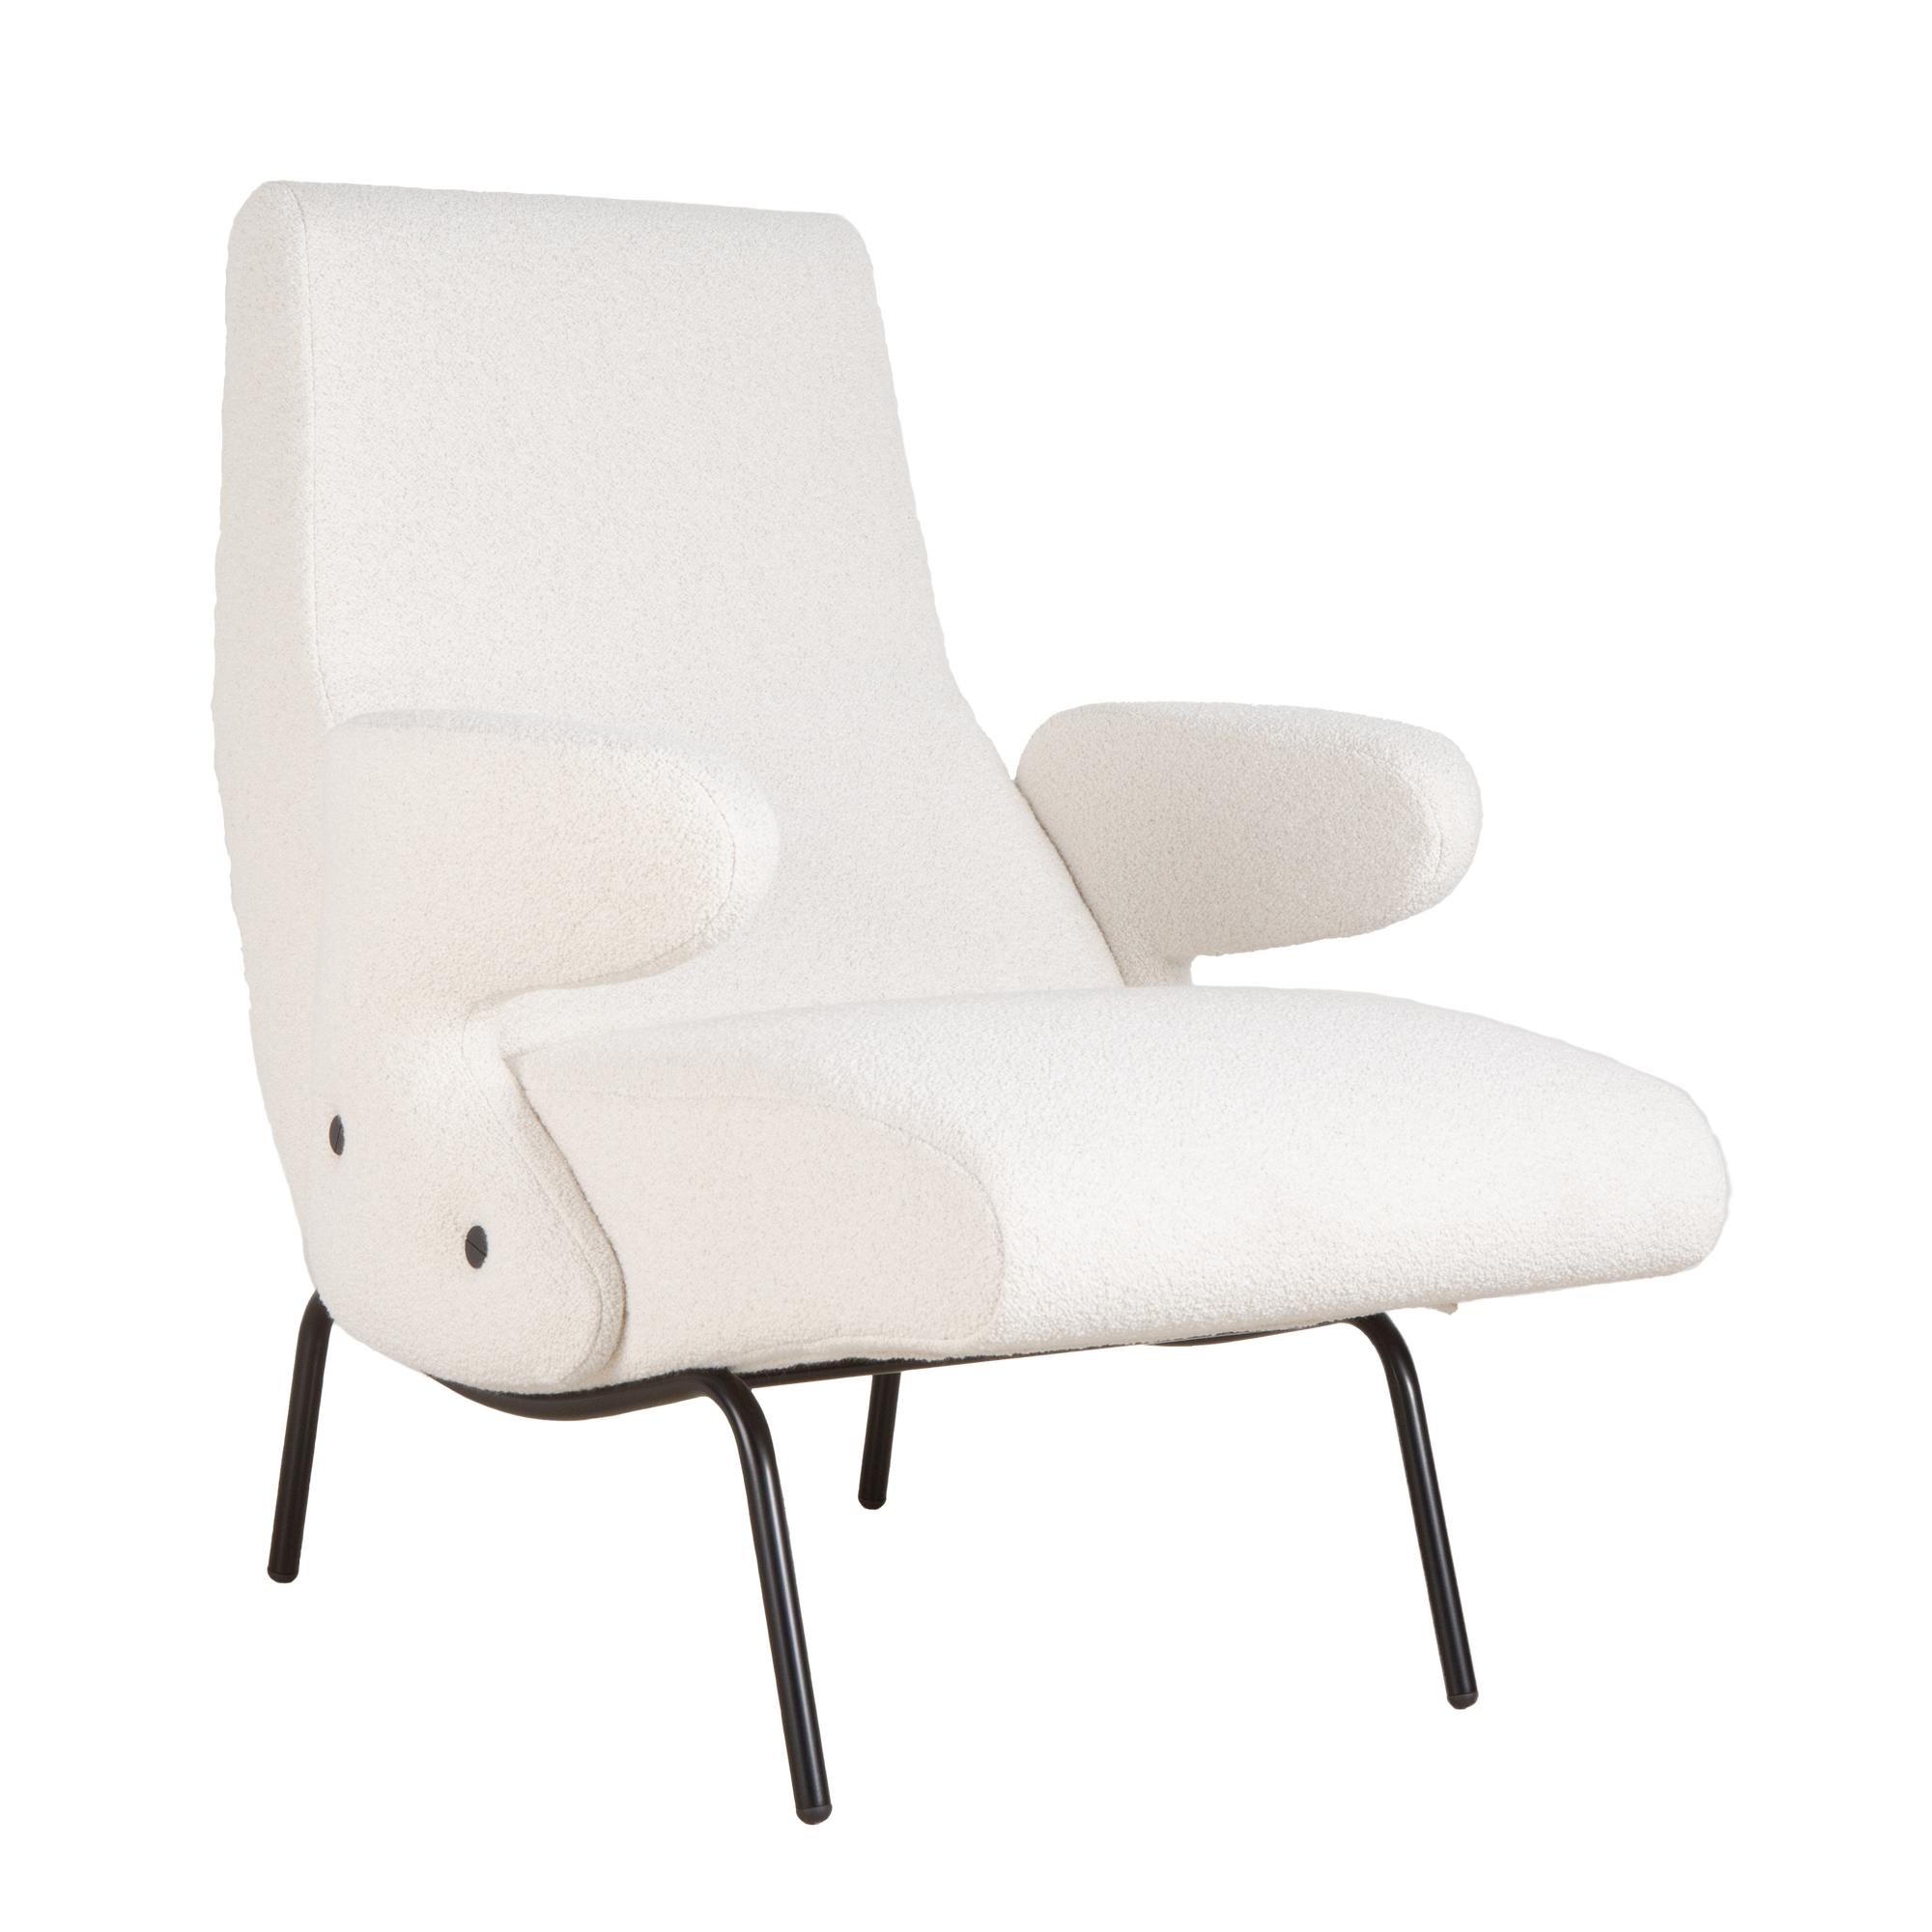 Erberto Carboni's Delfino Armchair, a design masterpiece for arflex from the mid-1950s, showcases thoughtful proportions and the harmonious interplay of curves and angles.